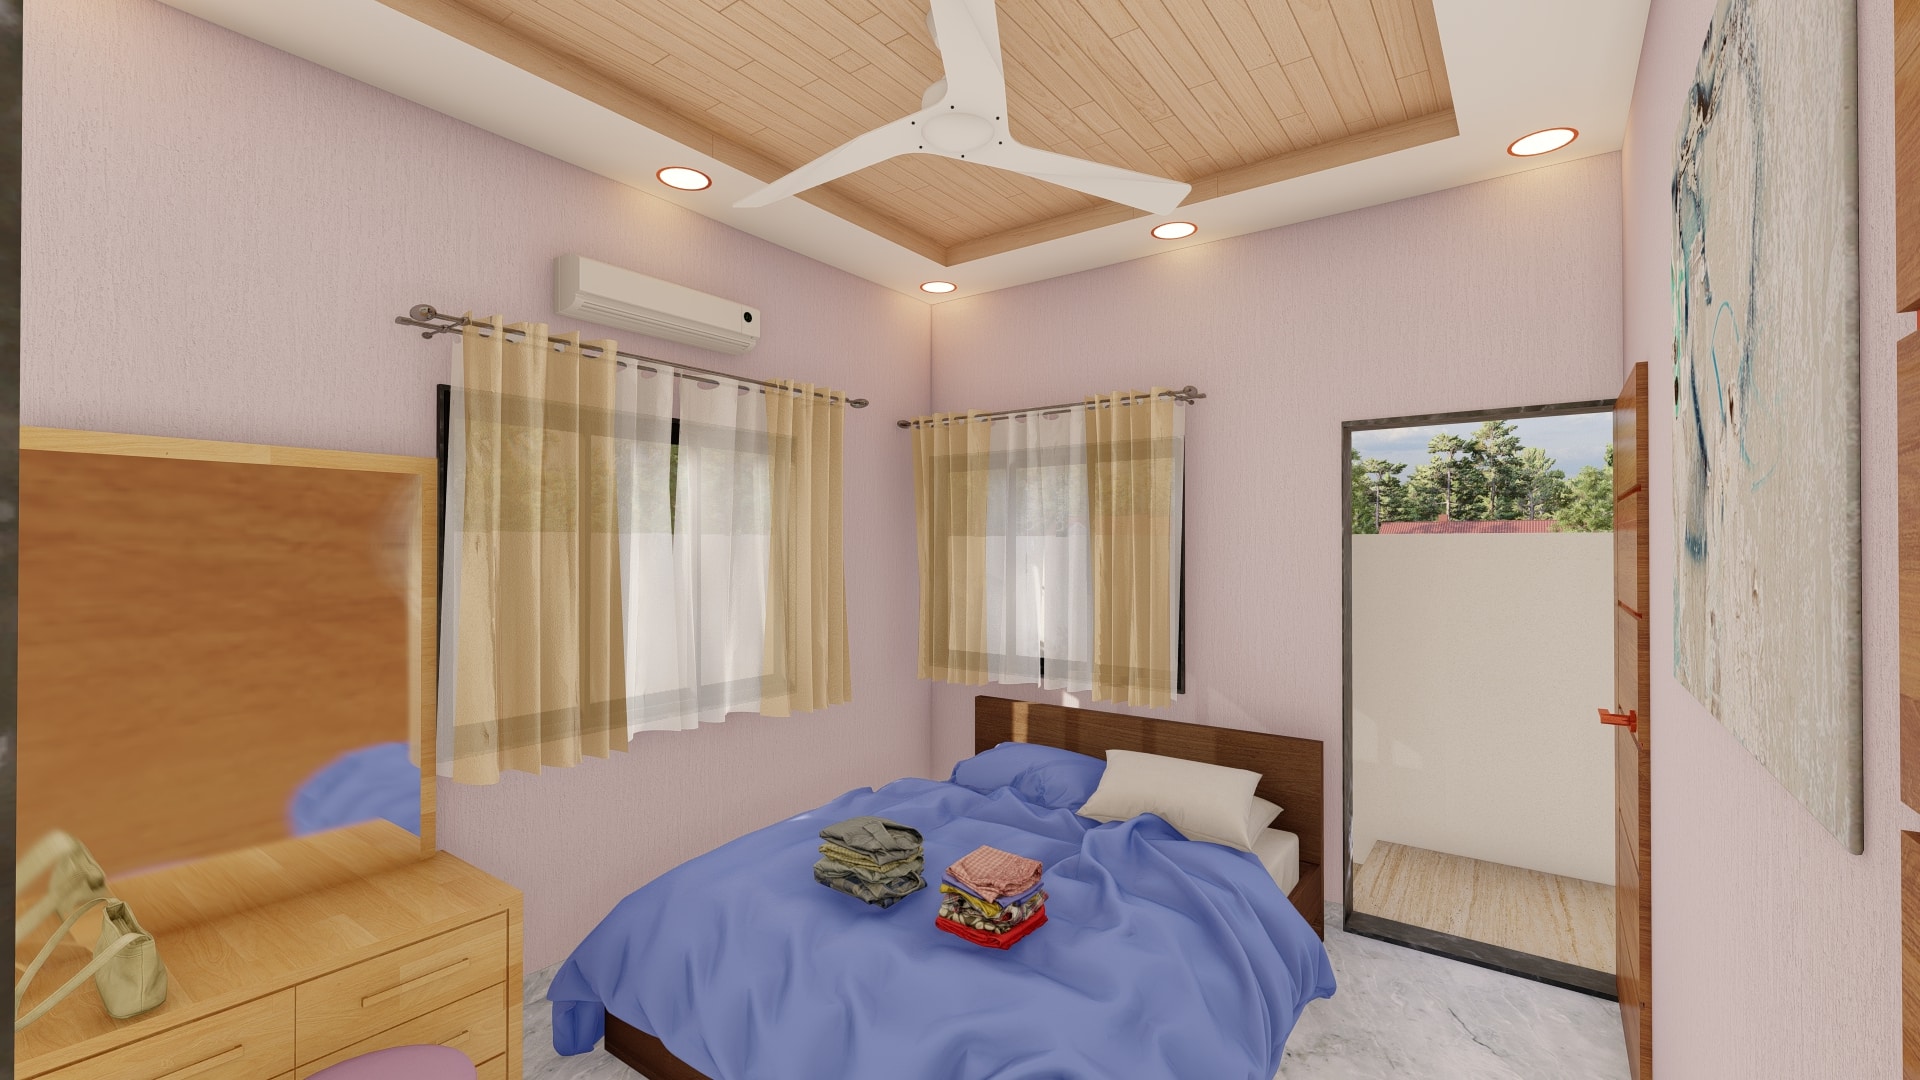 bedroom of top point bungalows by urban terrace east facing 30x50 sq ft